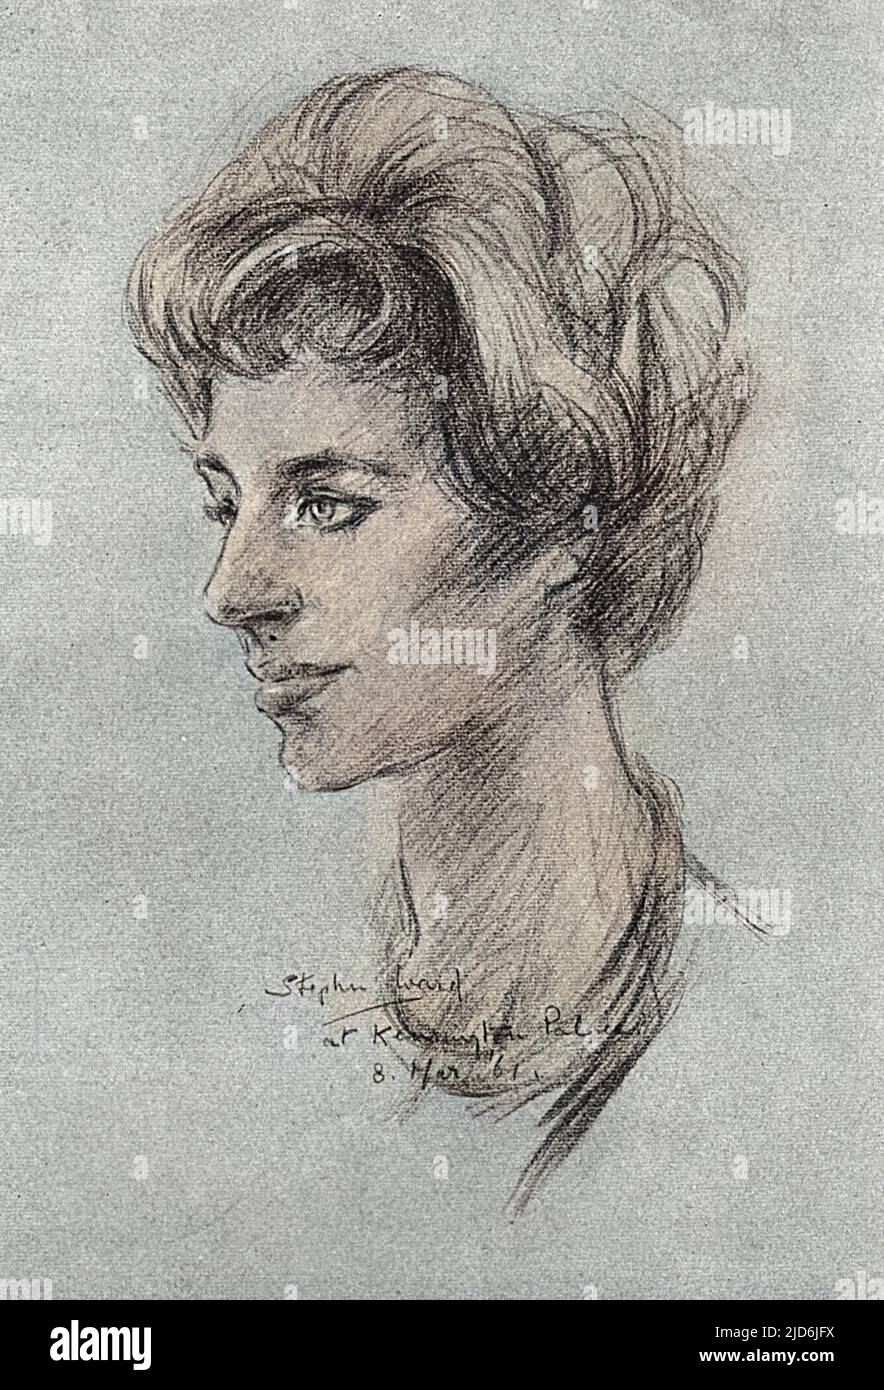 Princess Margaret(1930-2002), as drawn from life by Stephen Ward, at a sitting specially granted to the Illustrated London News in 1961. Ward sketched several high profile figures for the Illustrated London News in 1961, but two years later he would become notorious through his involvement in the Profumo Affair. Colourised version of: 10726295       Date: 1961 Stock Photo